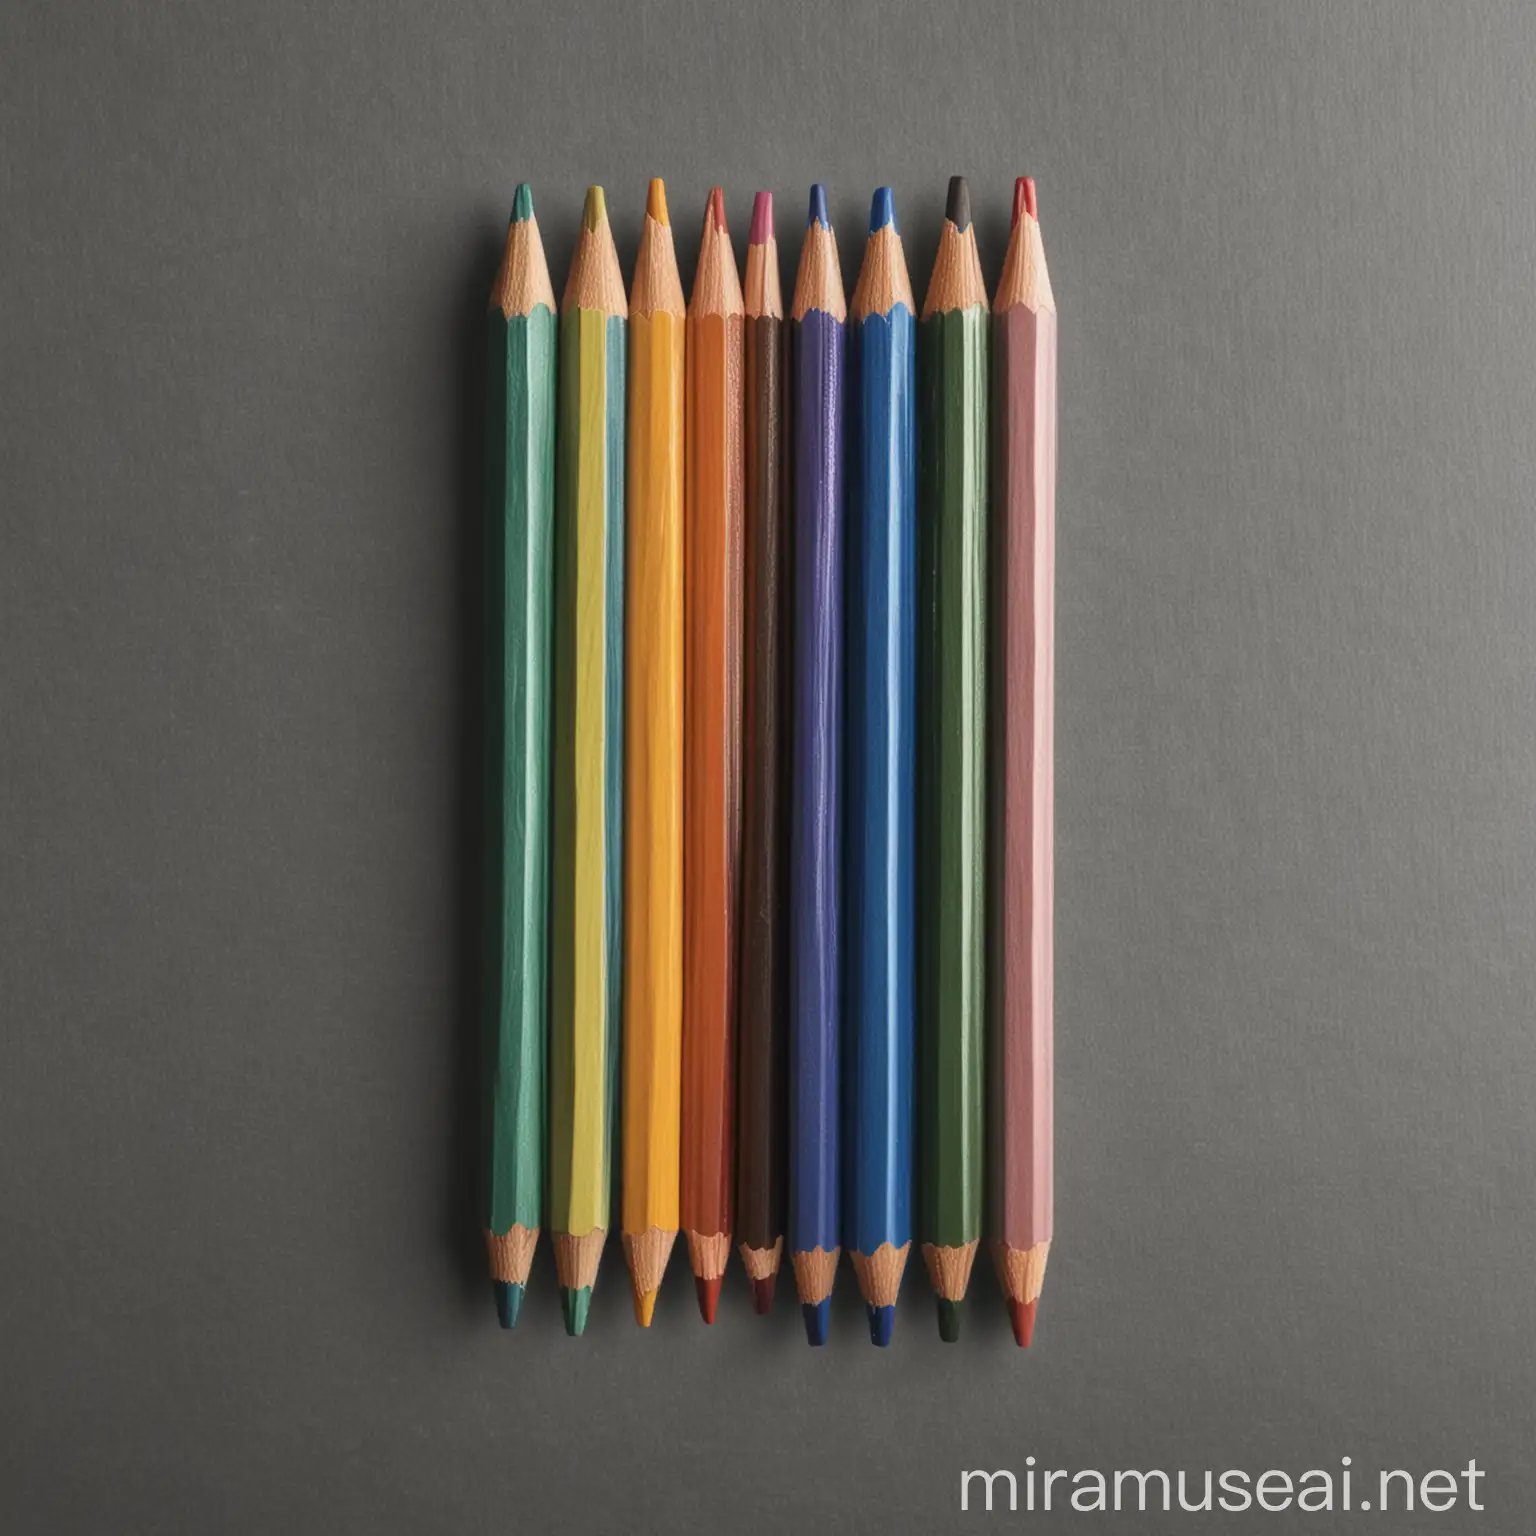 6 coloring pencils beside each others vertically